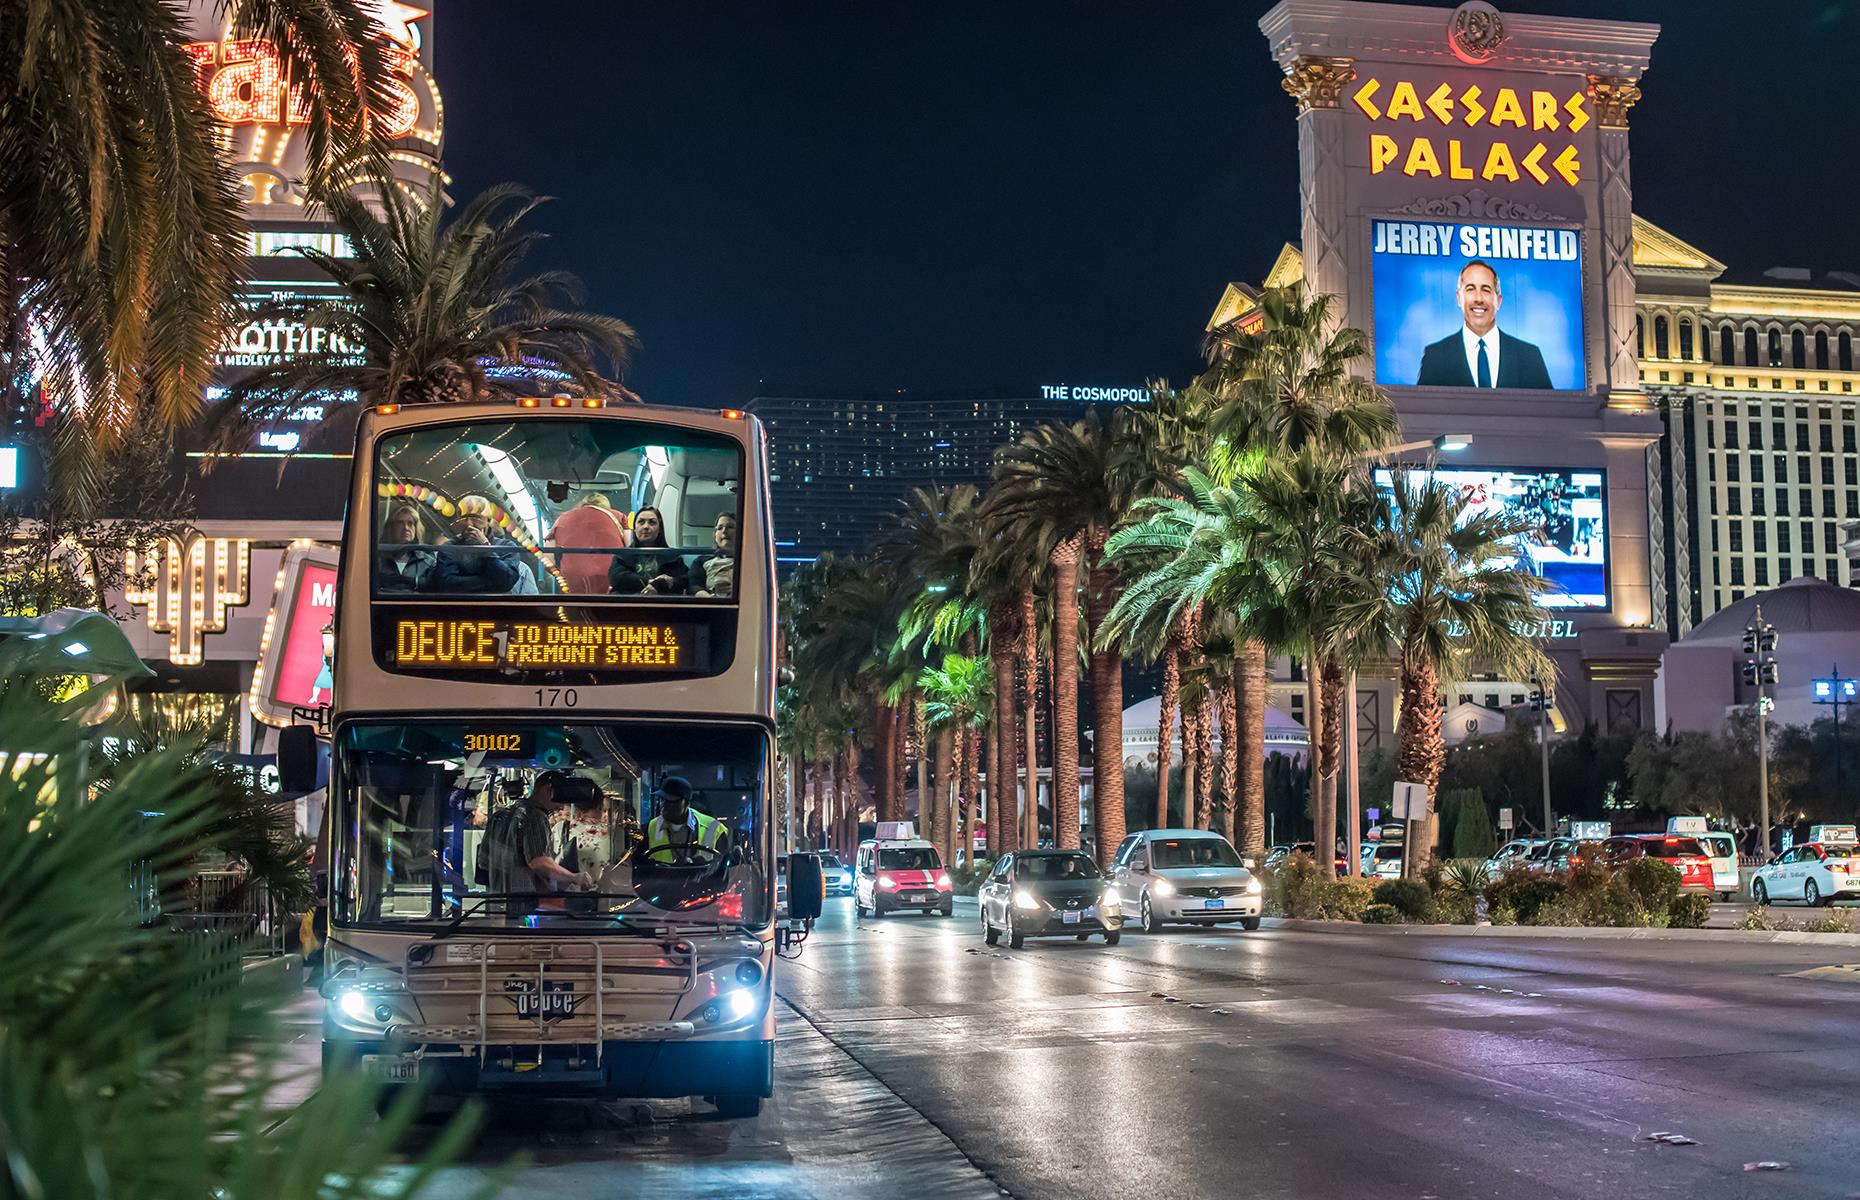 <p>Although <a href="http://www.loveexploring.com/guides/147652/things-to-do-in-las-vegas-hotels-on-the-strip-restaurants">Las Vegas's</a> desert climate doesn't make wandering particularly pleasant, many of the Strip's hotels are connected via airconditioned walkways, and there's even a free tram service connecting the Bellagio, Vdara, Park MGM and ARIA hotels, plus two more connecting the Mirage, Luxor, Excalibur, Treasure Island and Mandalay Bay hotels. There are also the Deuce (paid) and <a href="https://www.lasvegasnevada.gov/Residents/Parking-Transportation/Downtown-Loop">Downtown Loop</a> (free) bus services, connecting cultural attractions in Vegas's downtown to the glitz and glamor of the Strip.</p>  <p><a href="https://www.loveexploring.com/gallerylist/99342/sin-city-secrets-the-incredible-story-of-las-vegas"><strong>Check out the fascinating history of Las Vegas here</strong></a></p>